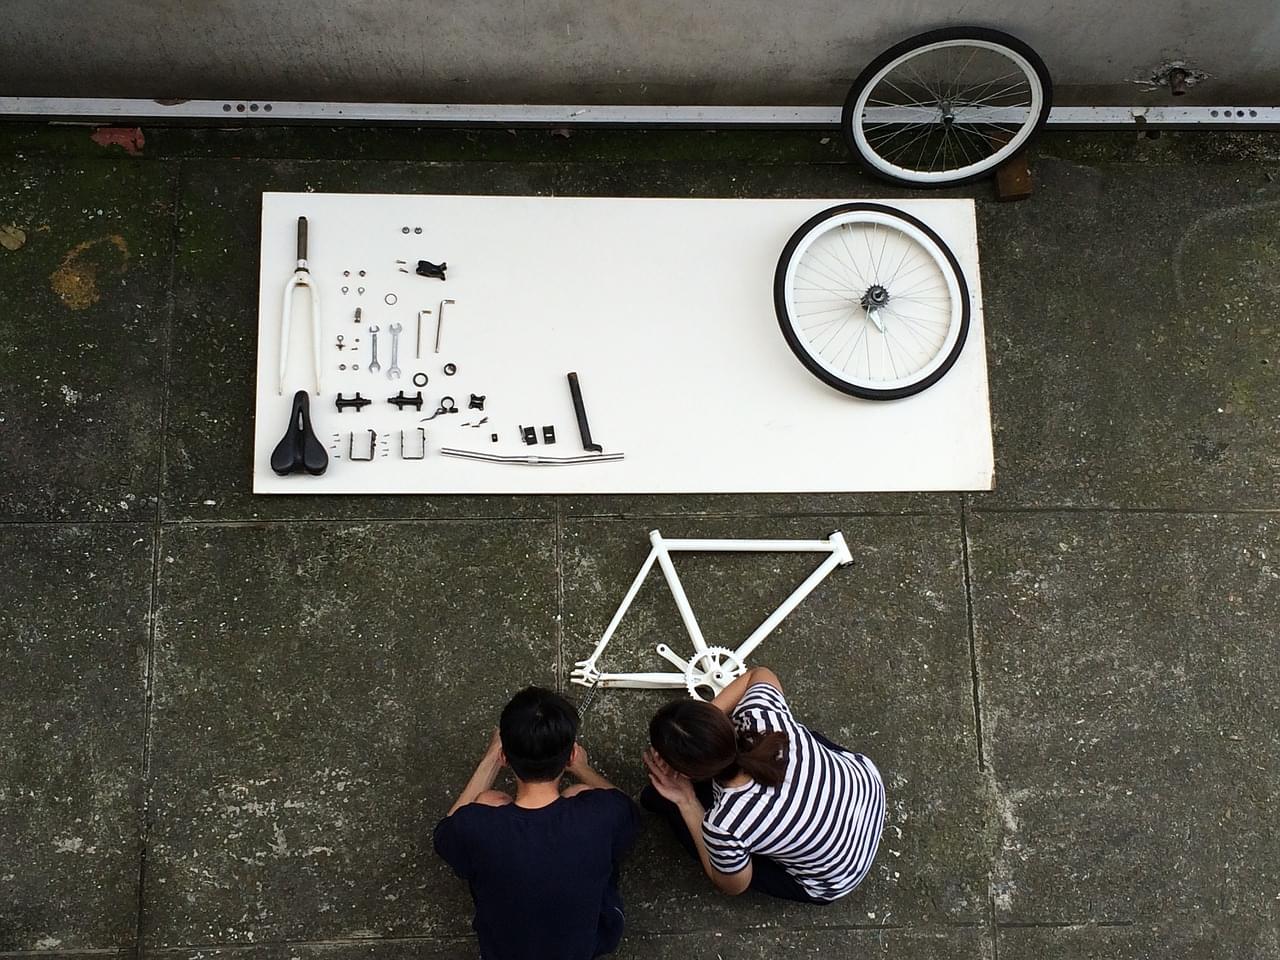 Assembling a bicycle